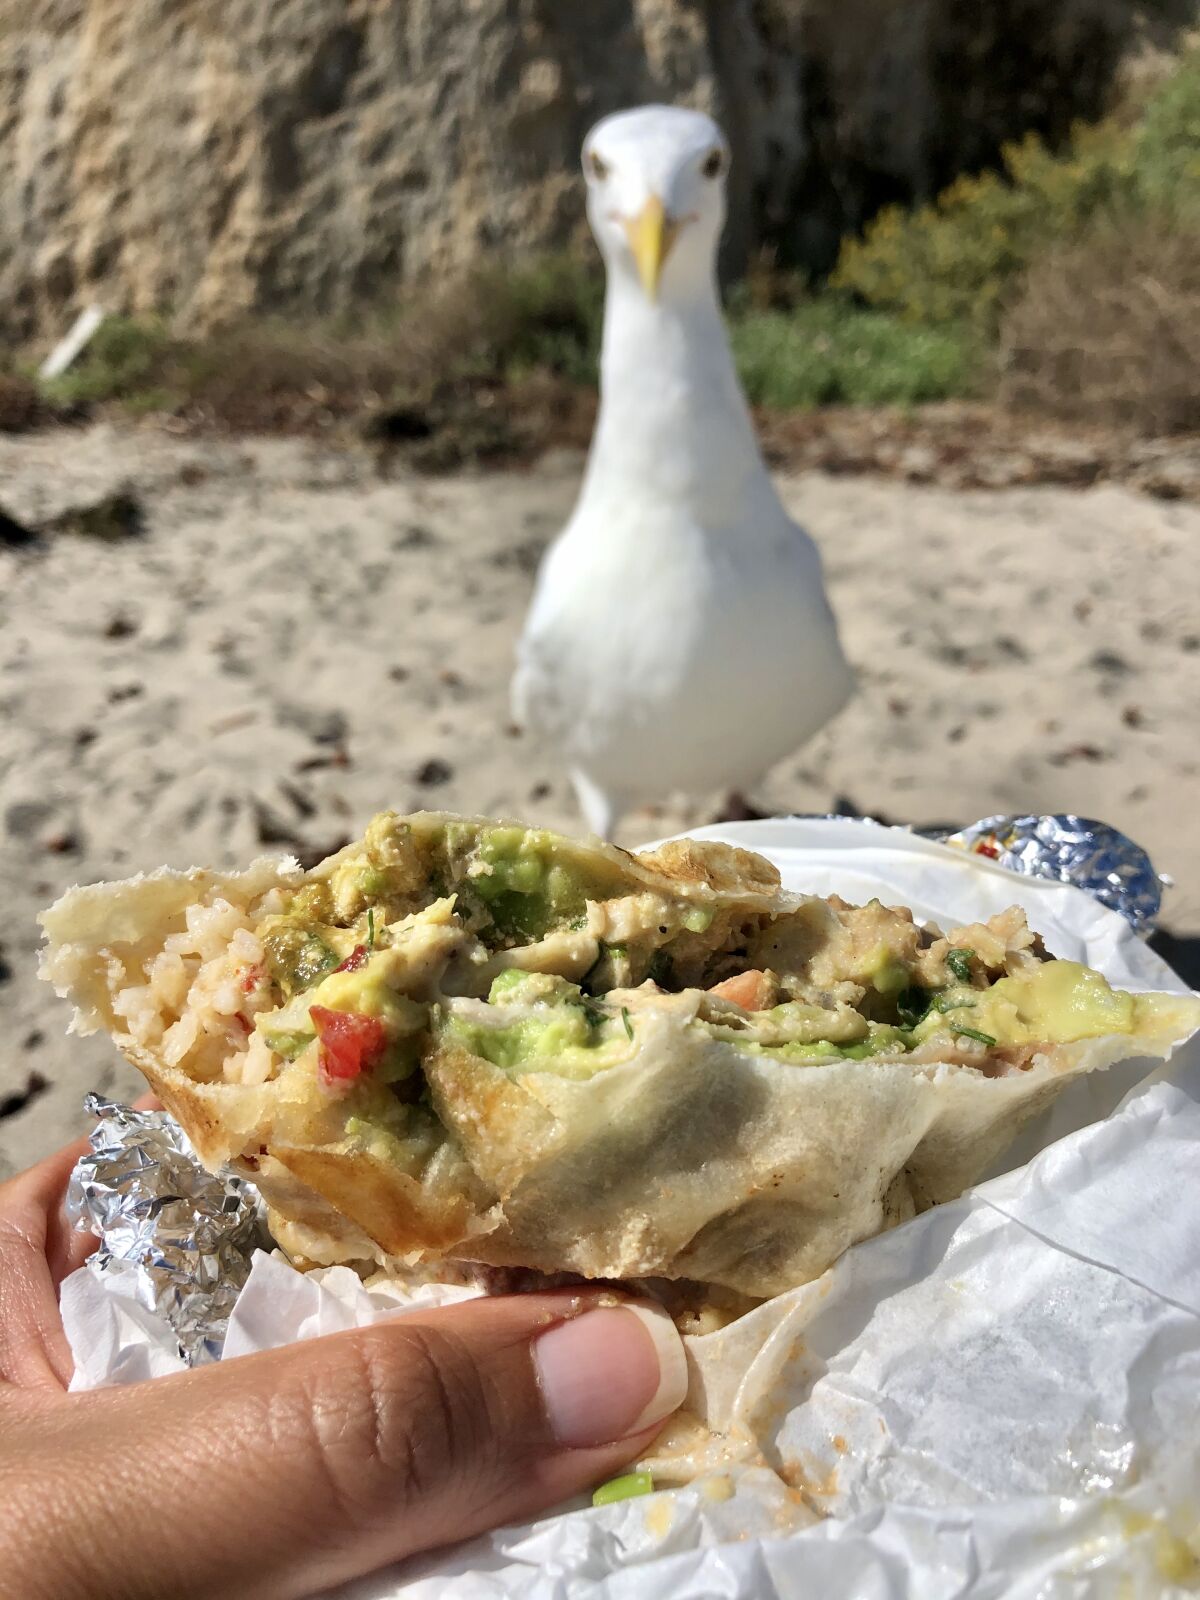 If you don't finish your Lily's Malibu breakfast burrito at Sandstone Peak, bring the leftovers to the beach.